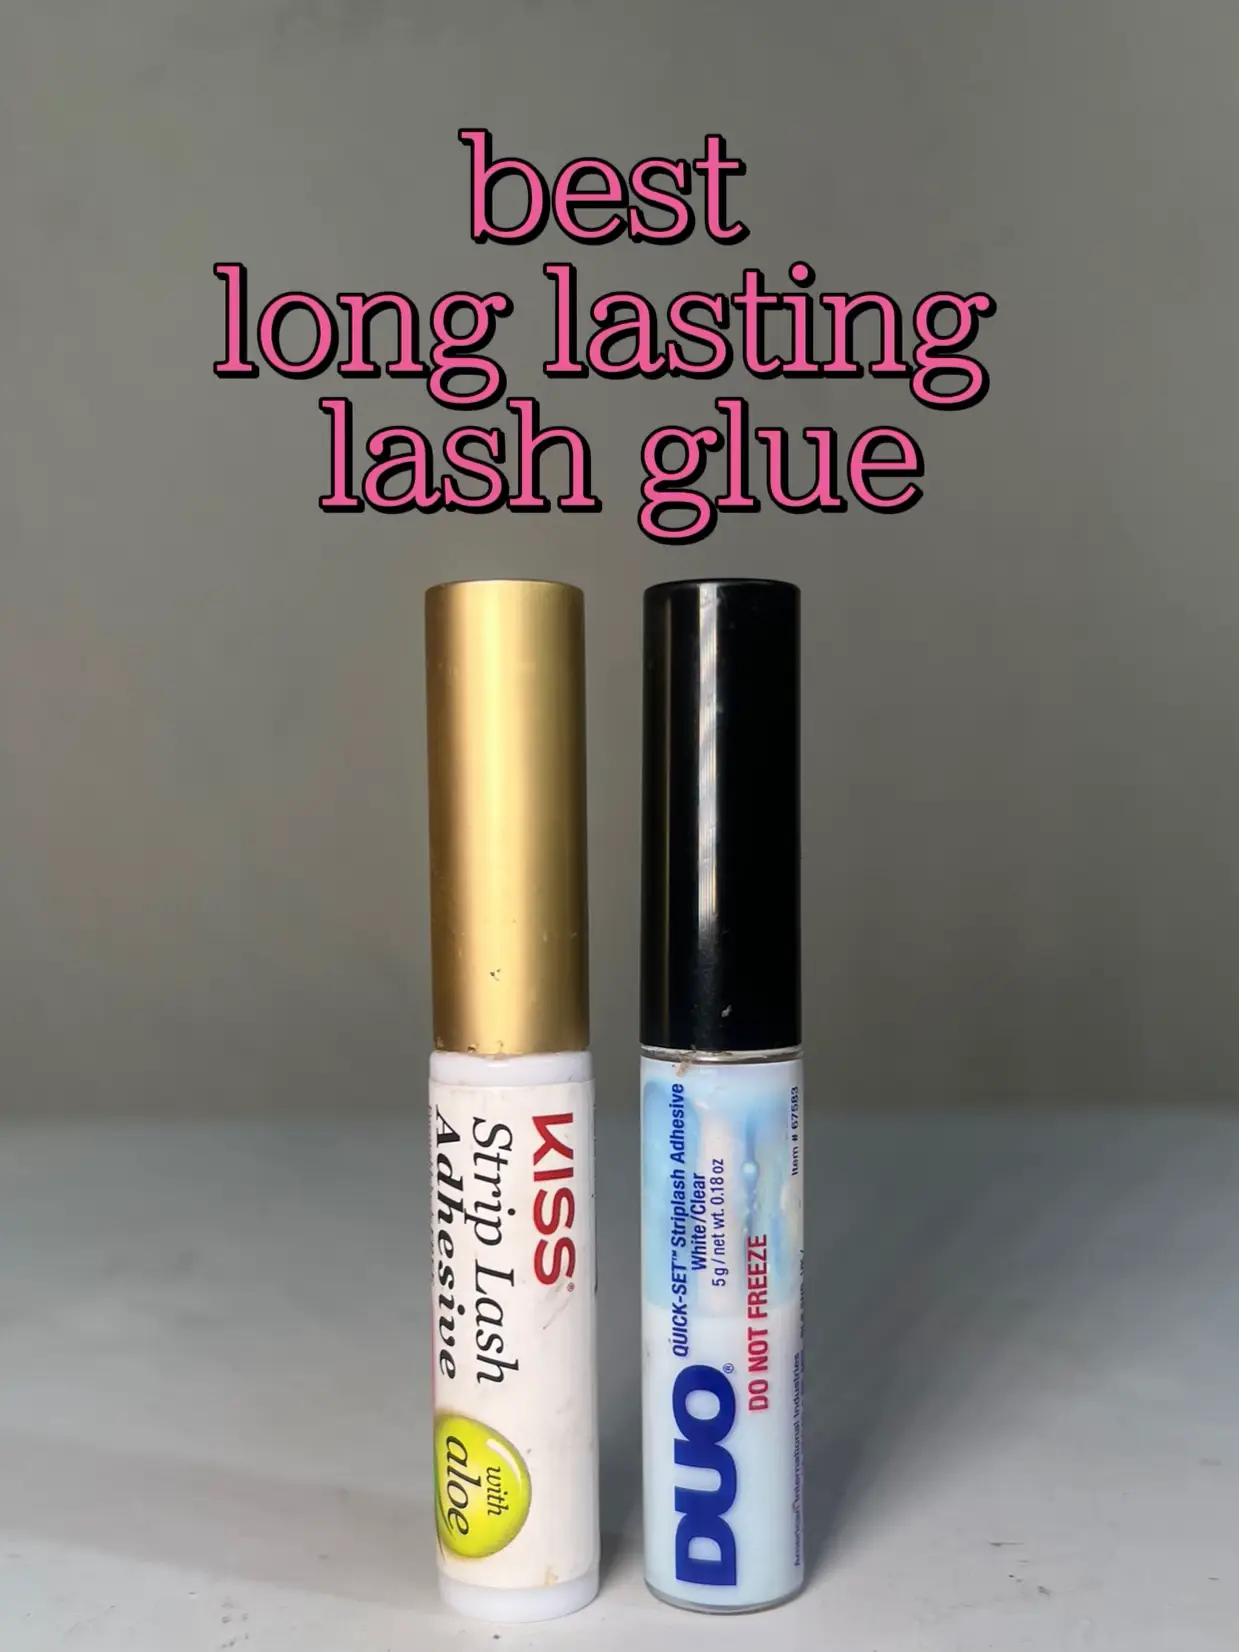  Two bottles of best long lasting lash glue are displayed on a white background.